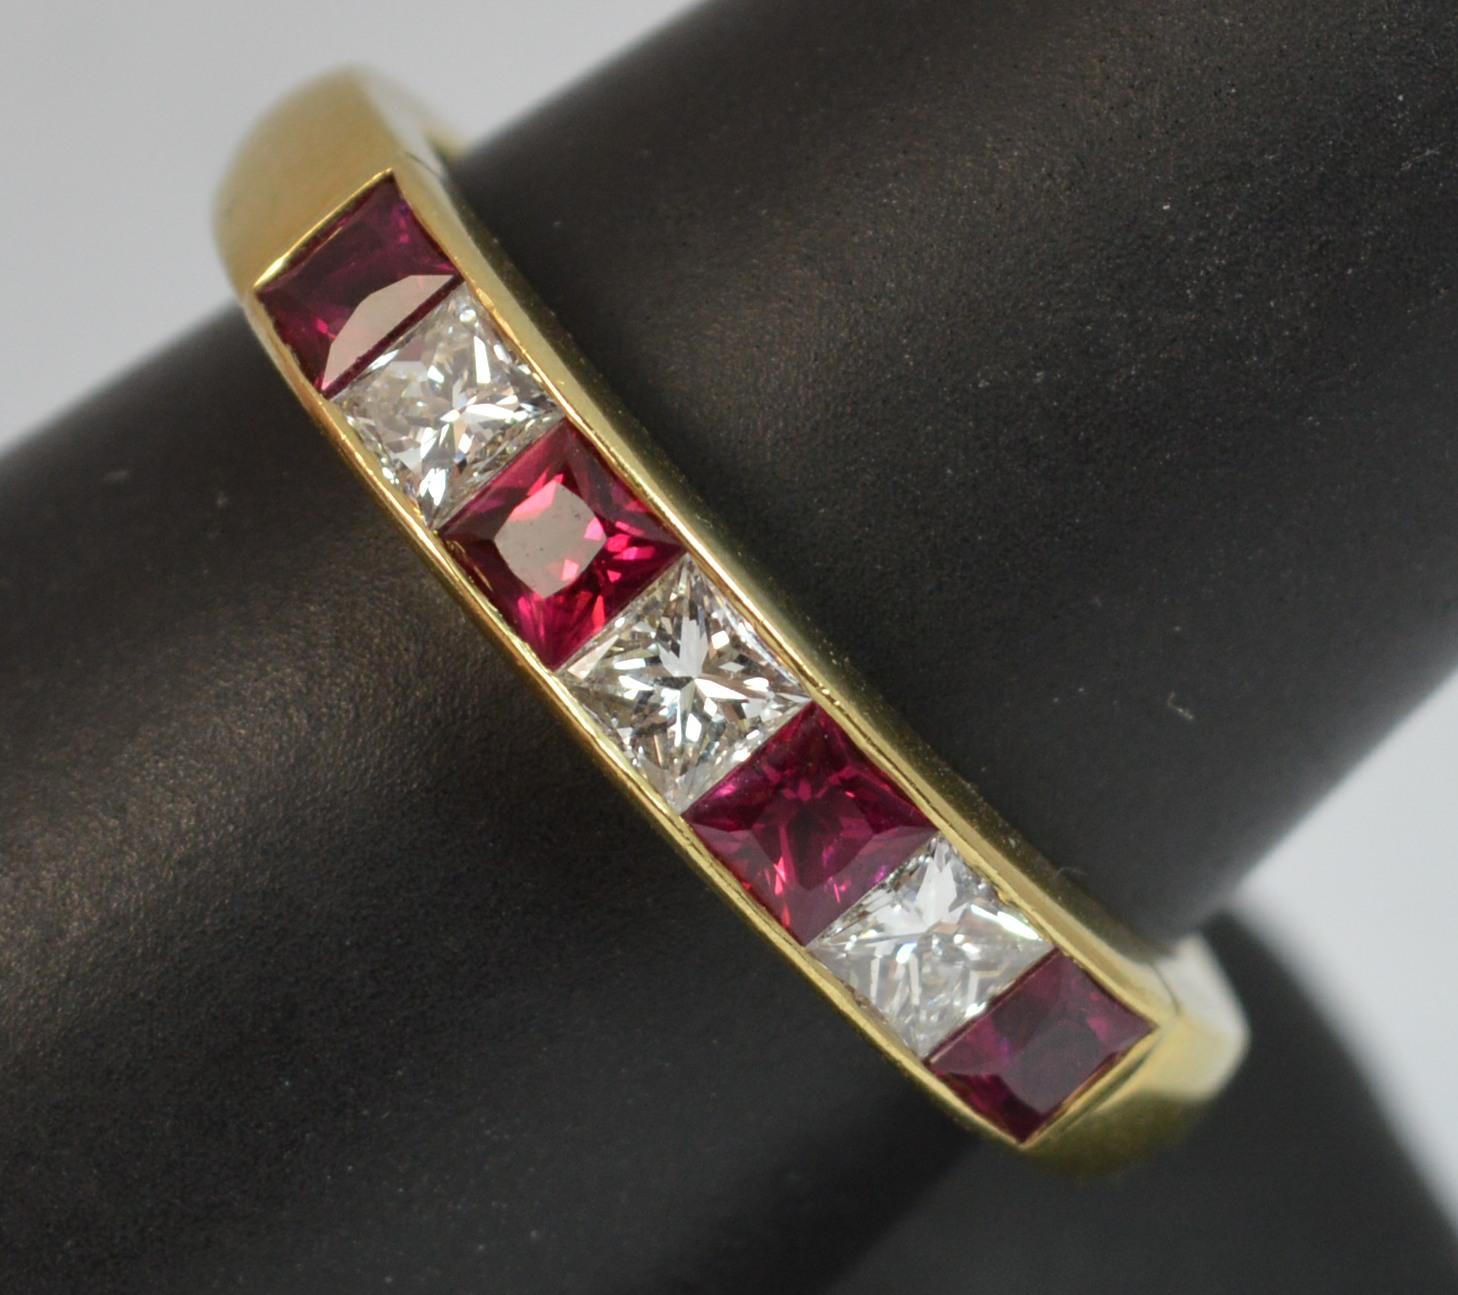 
A stunning quality Ruby and Diamond ring.

Made and retailed by Cropp and Farr, reknowned for using stunning quality gemstones and VS grade diamonds throughout all pieces.

Modelled in a solid 18 carat yellow gold shank.

Set with alternating